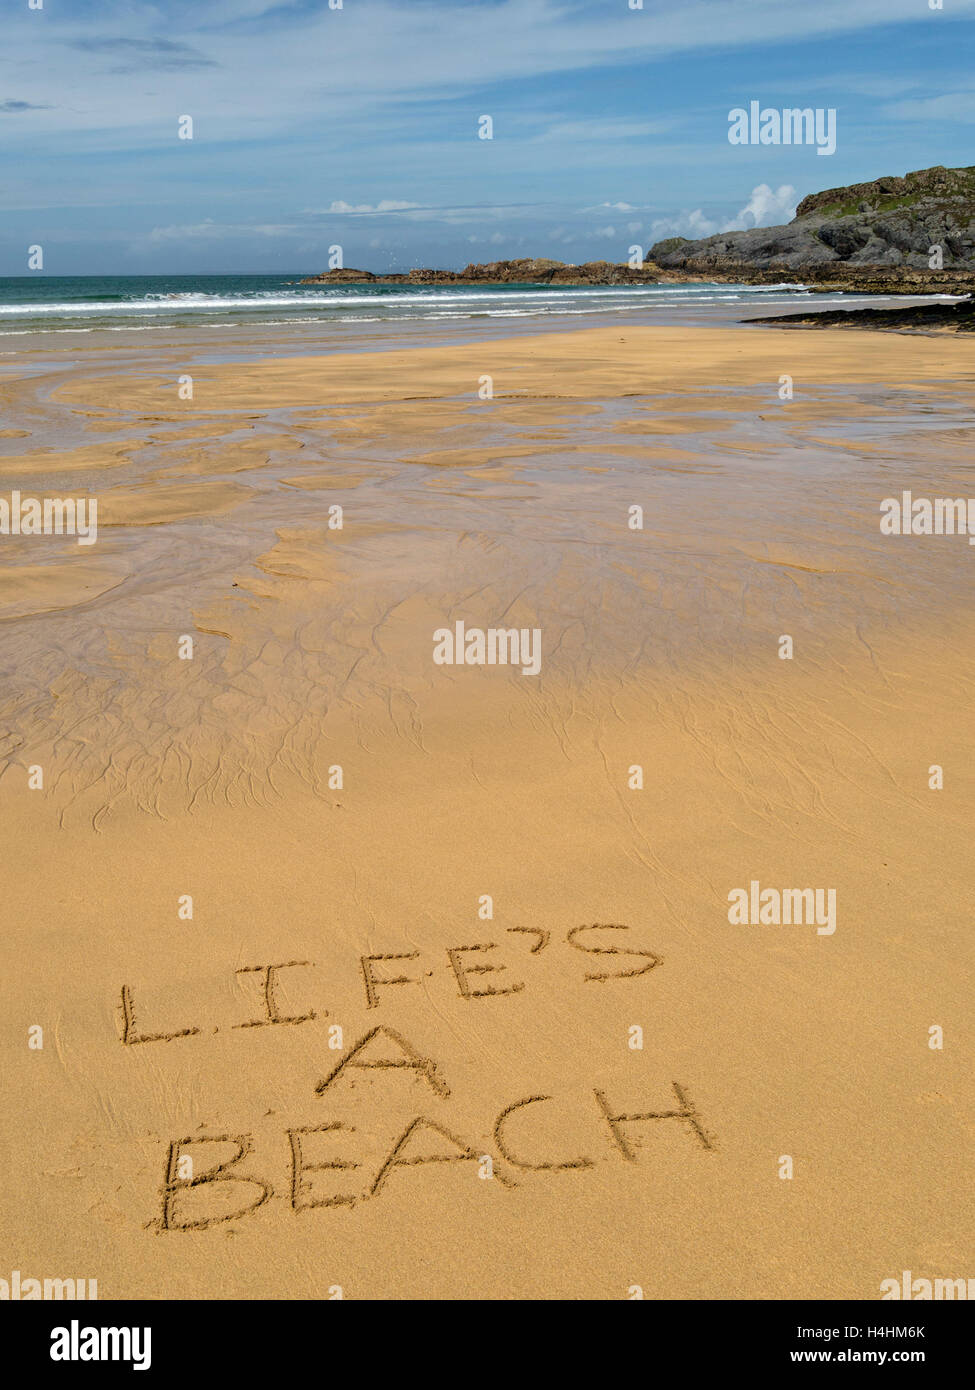 The words 'Life's a beach' written in golden yellow sand of remote Scottish beach. Stock Photo